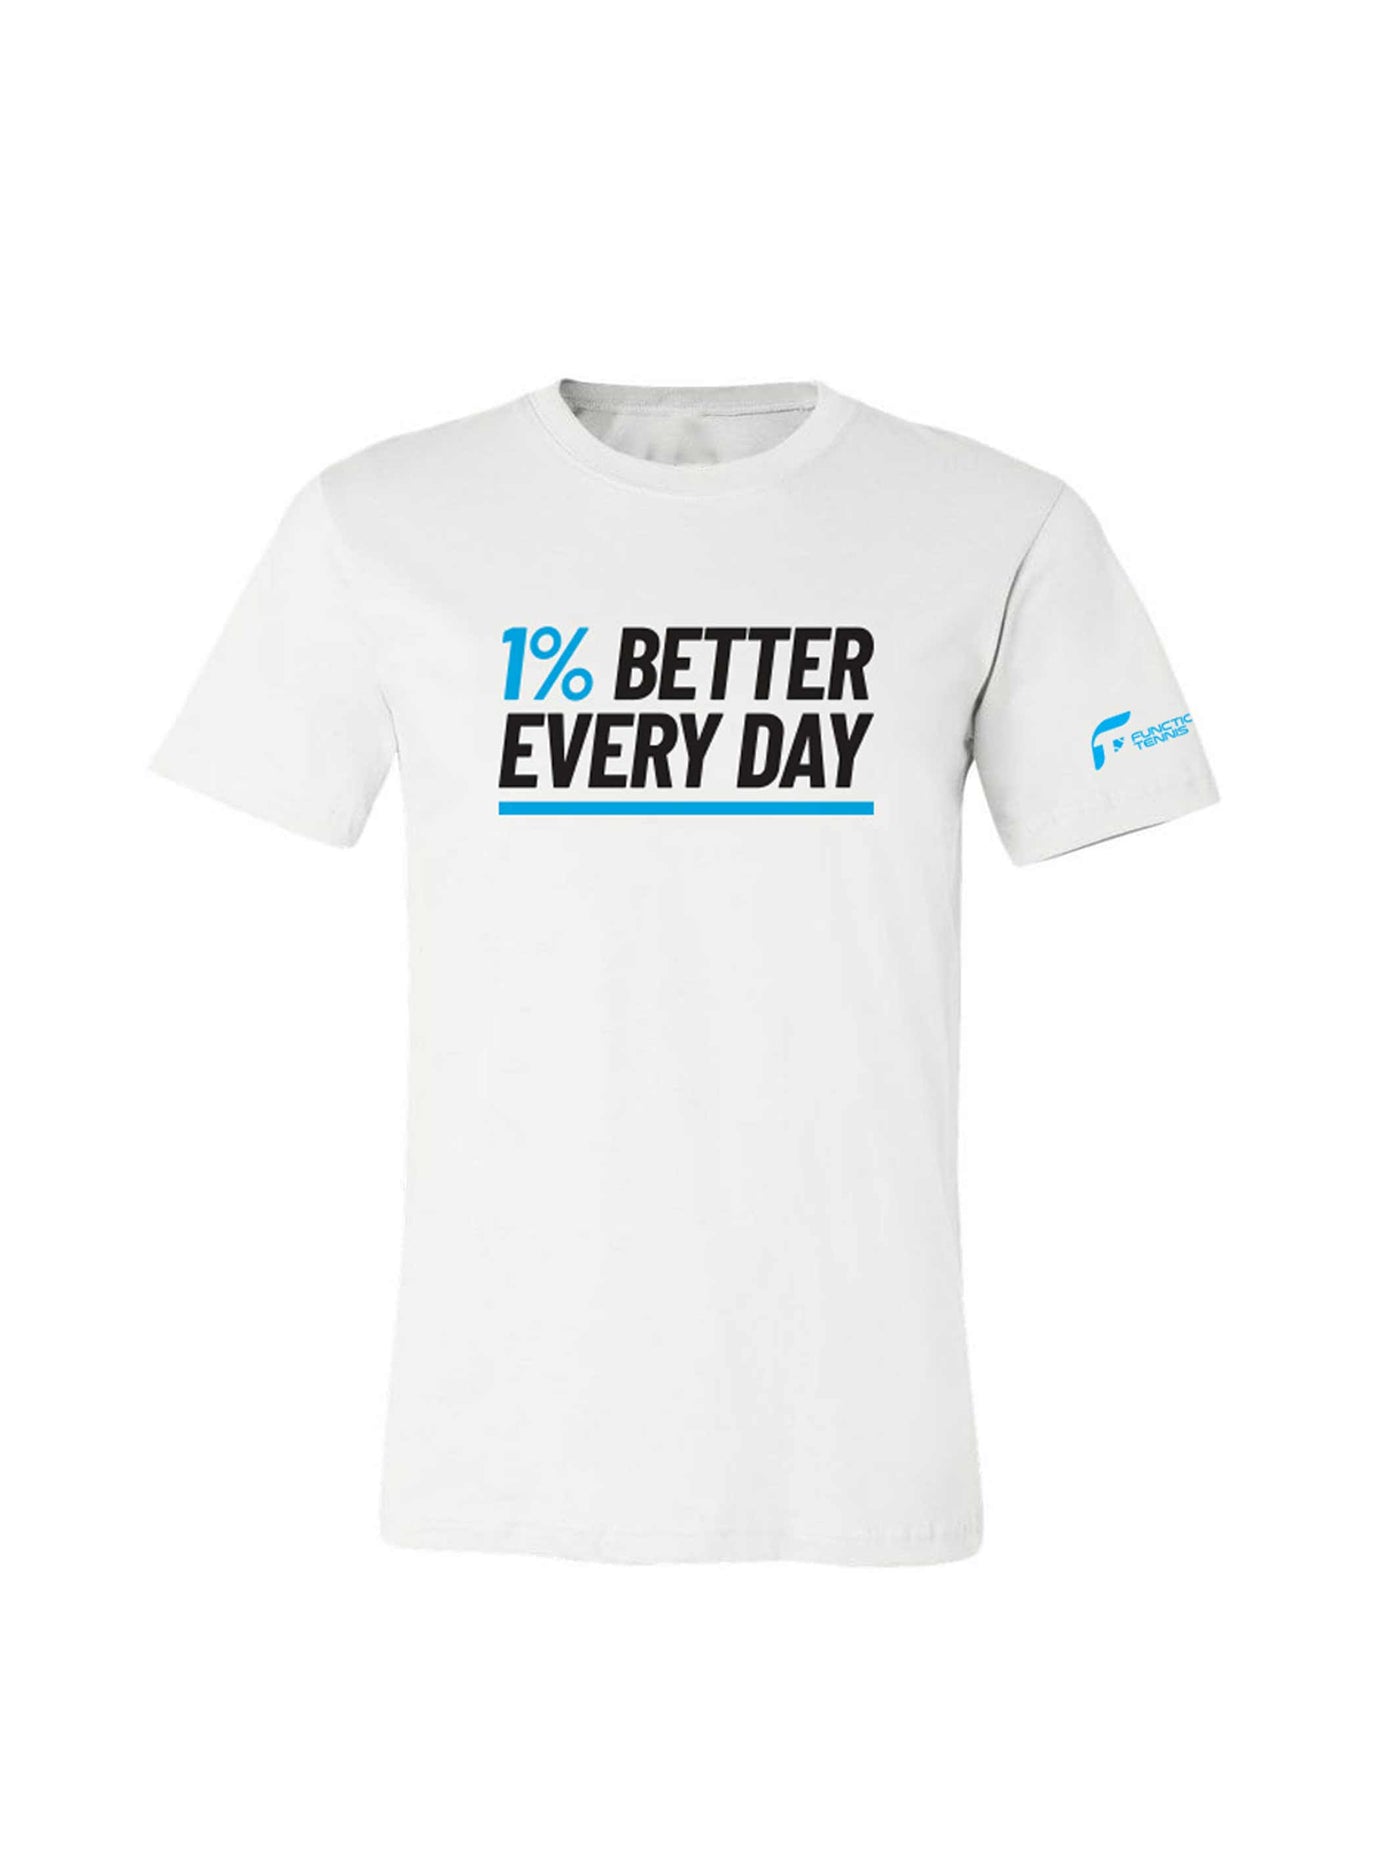 1% Better Every Day T-Shirt